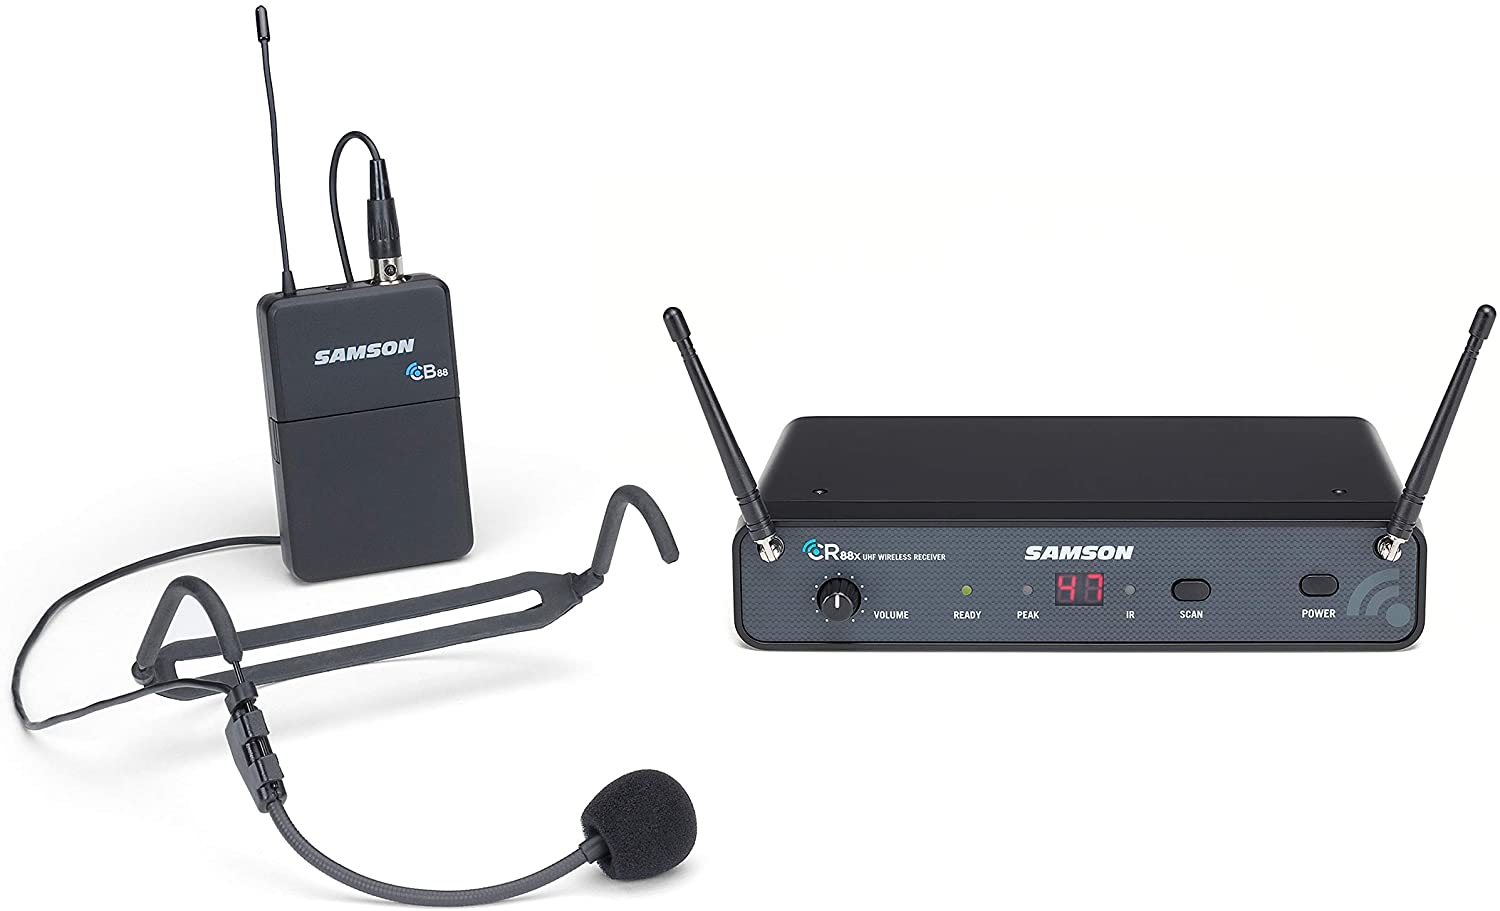 Samson Concert 88x Wireless Headset Microphone System (D: 542 to 566 MHz) - Pro-Distributing